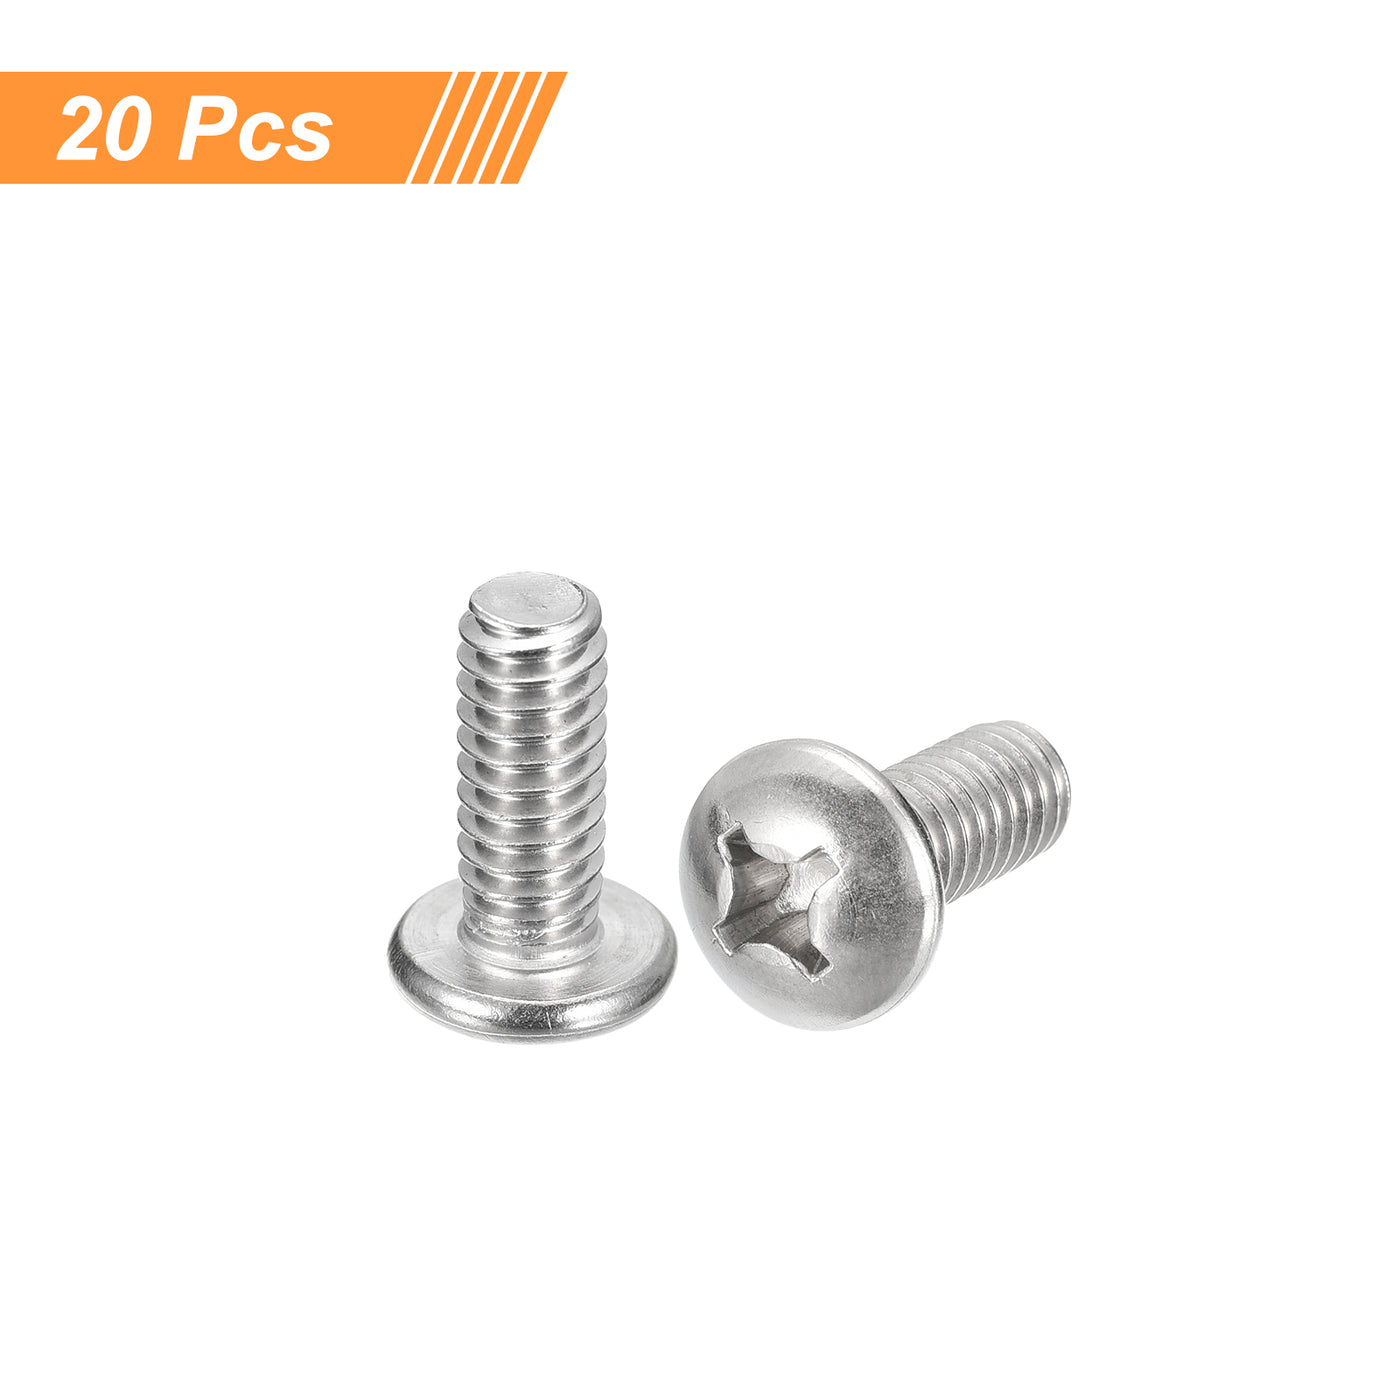 uxcell Uxcell 1/4-20x5/8" Pan Head Machine Screws, Stainless Steel 18-8 Screw, Pack of 20